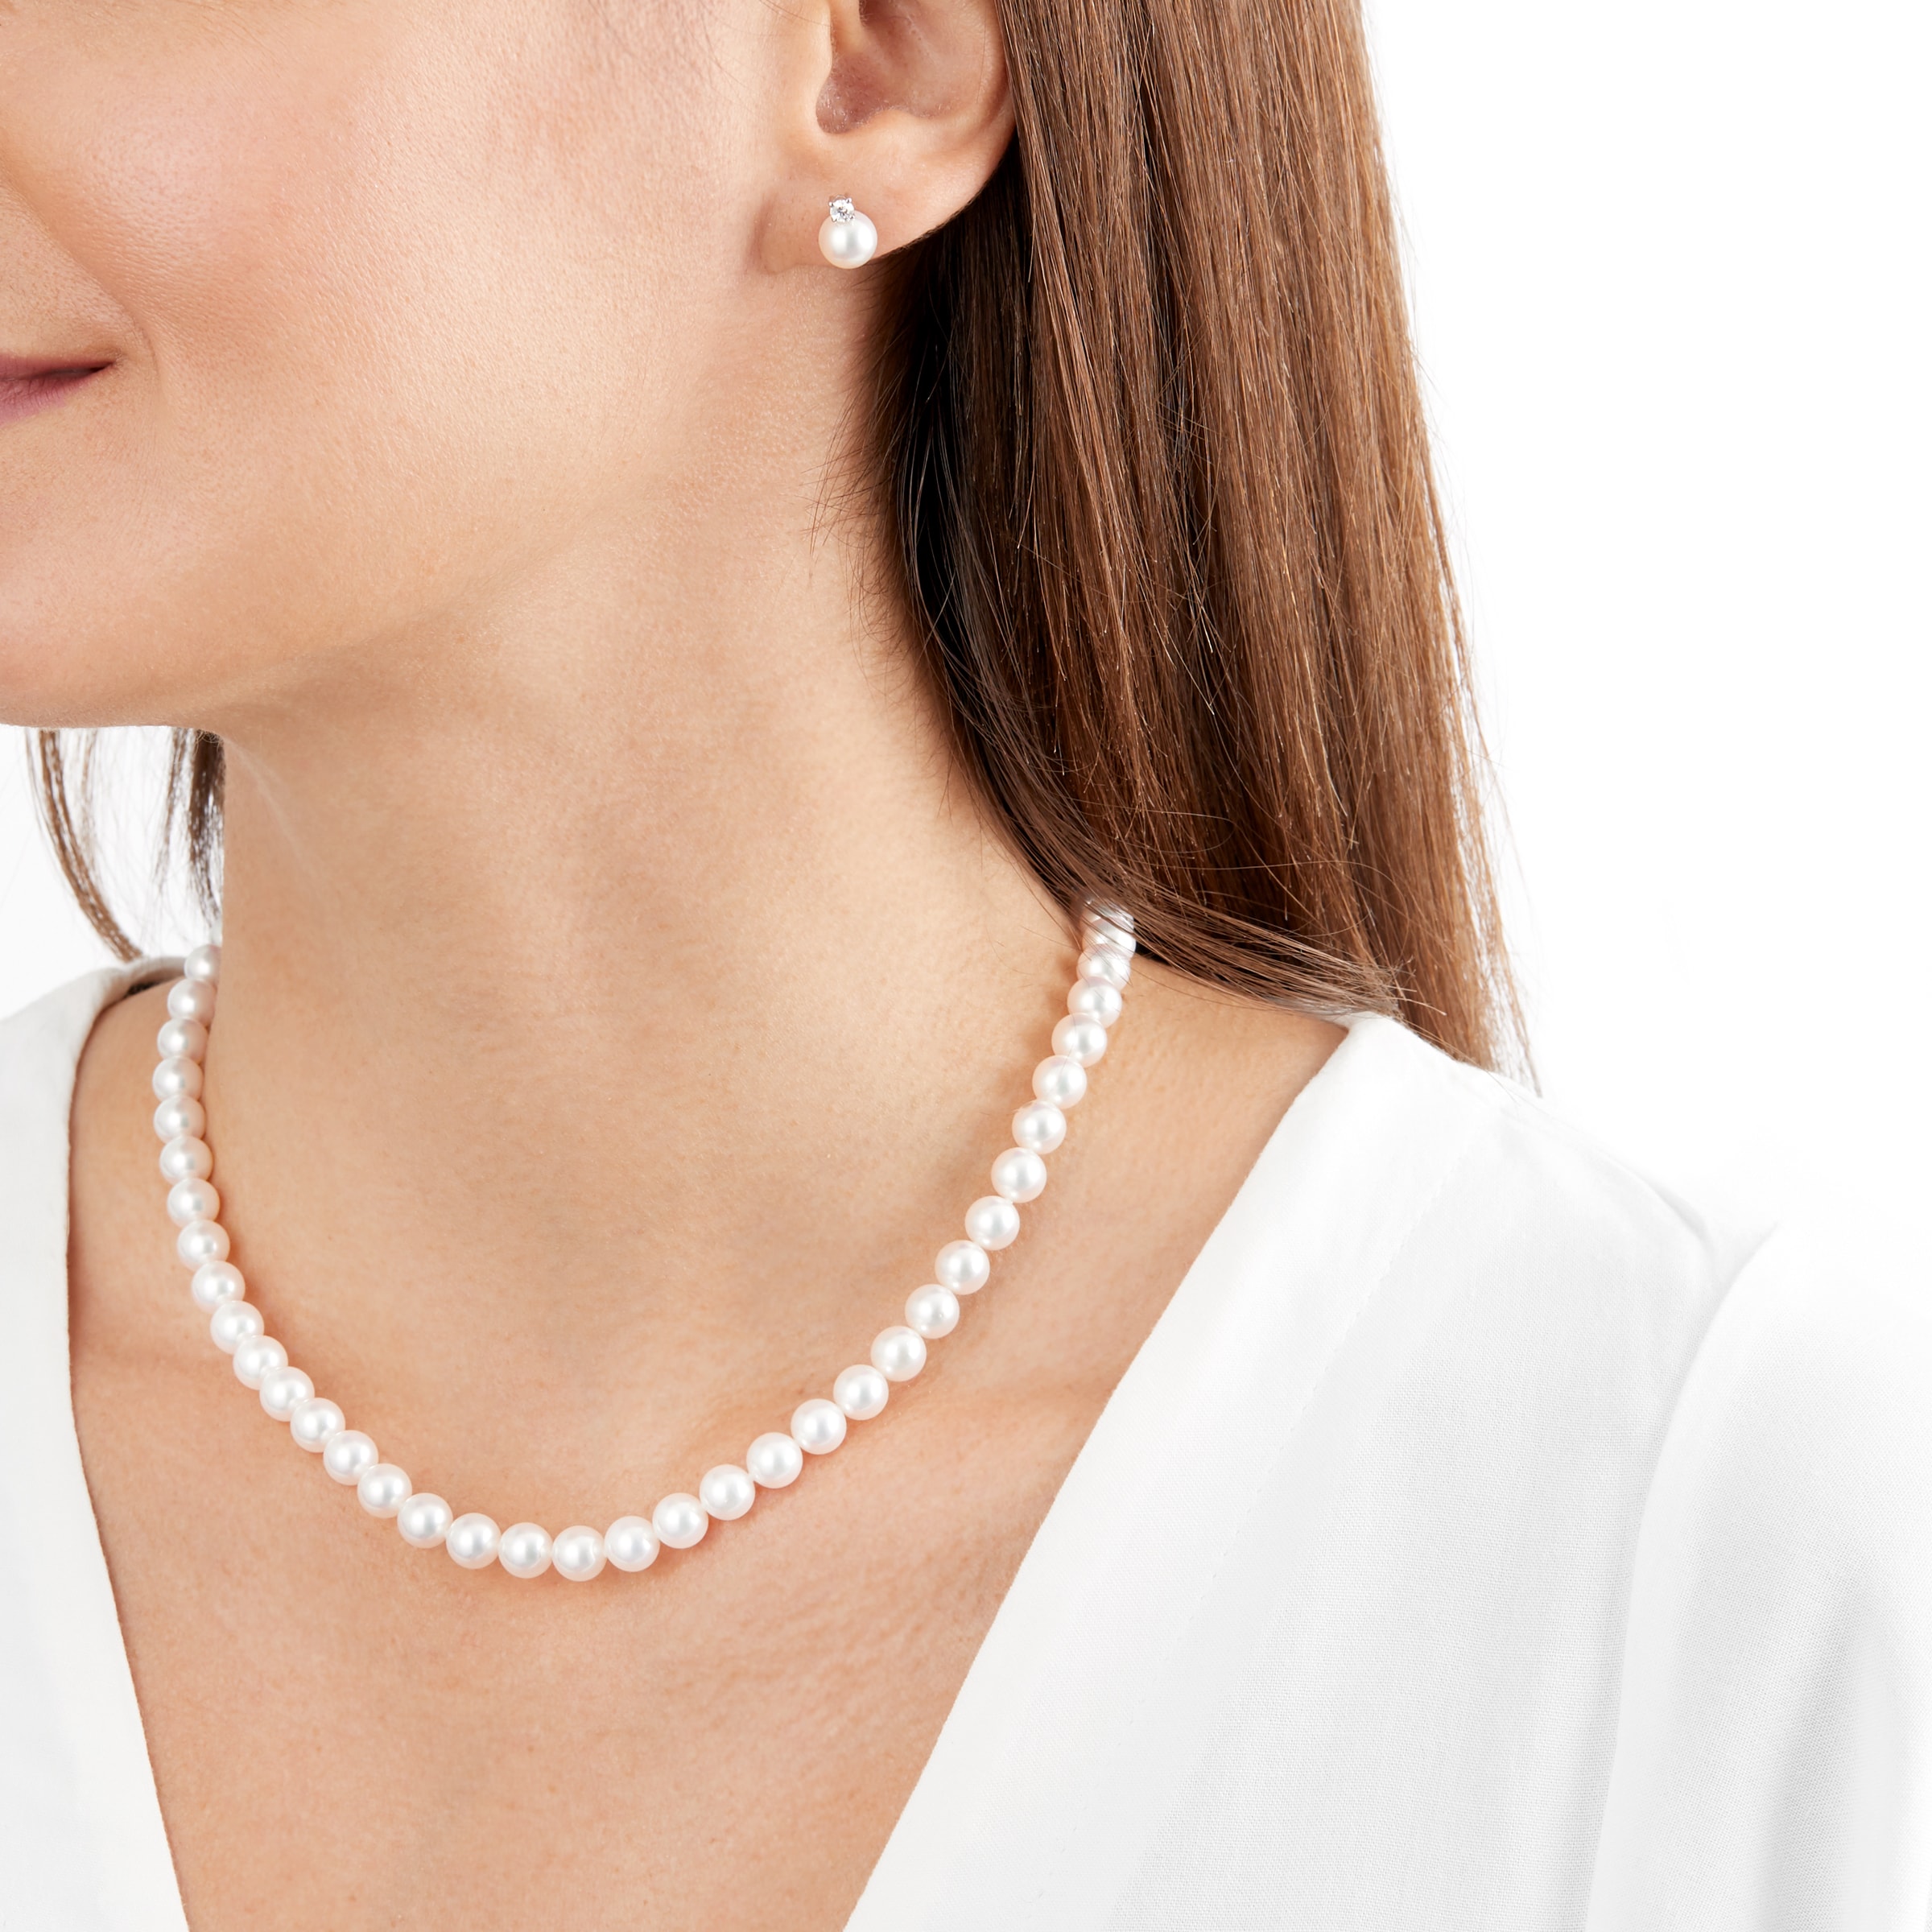 Mikimoto Exclusive Akoya Pearl Necklace and Stud Earrings Set